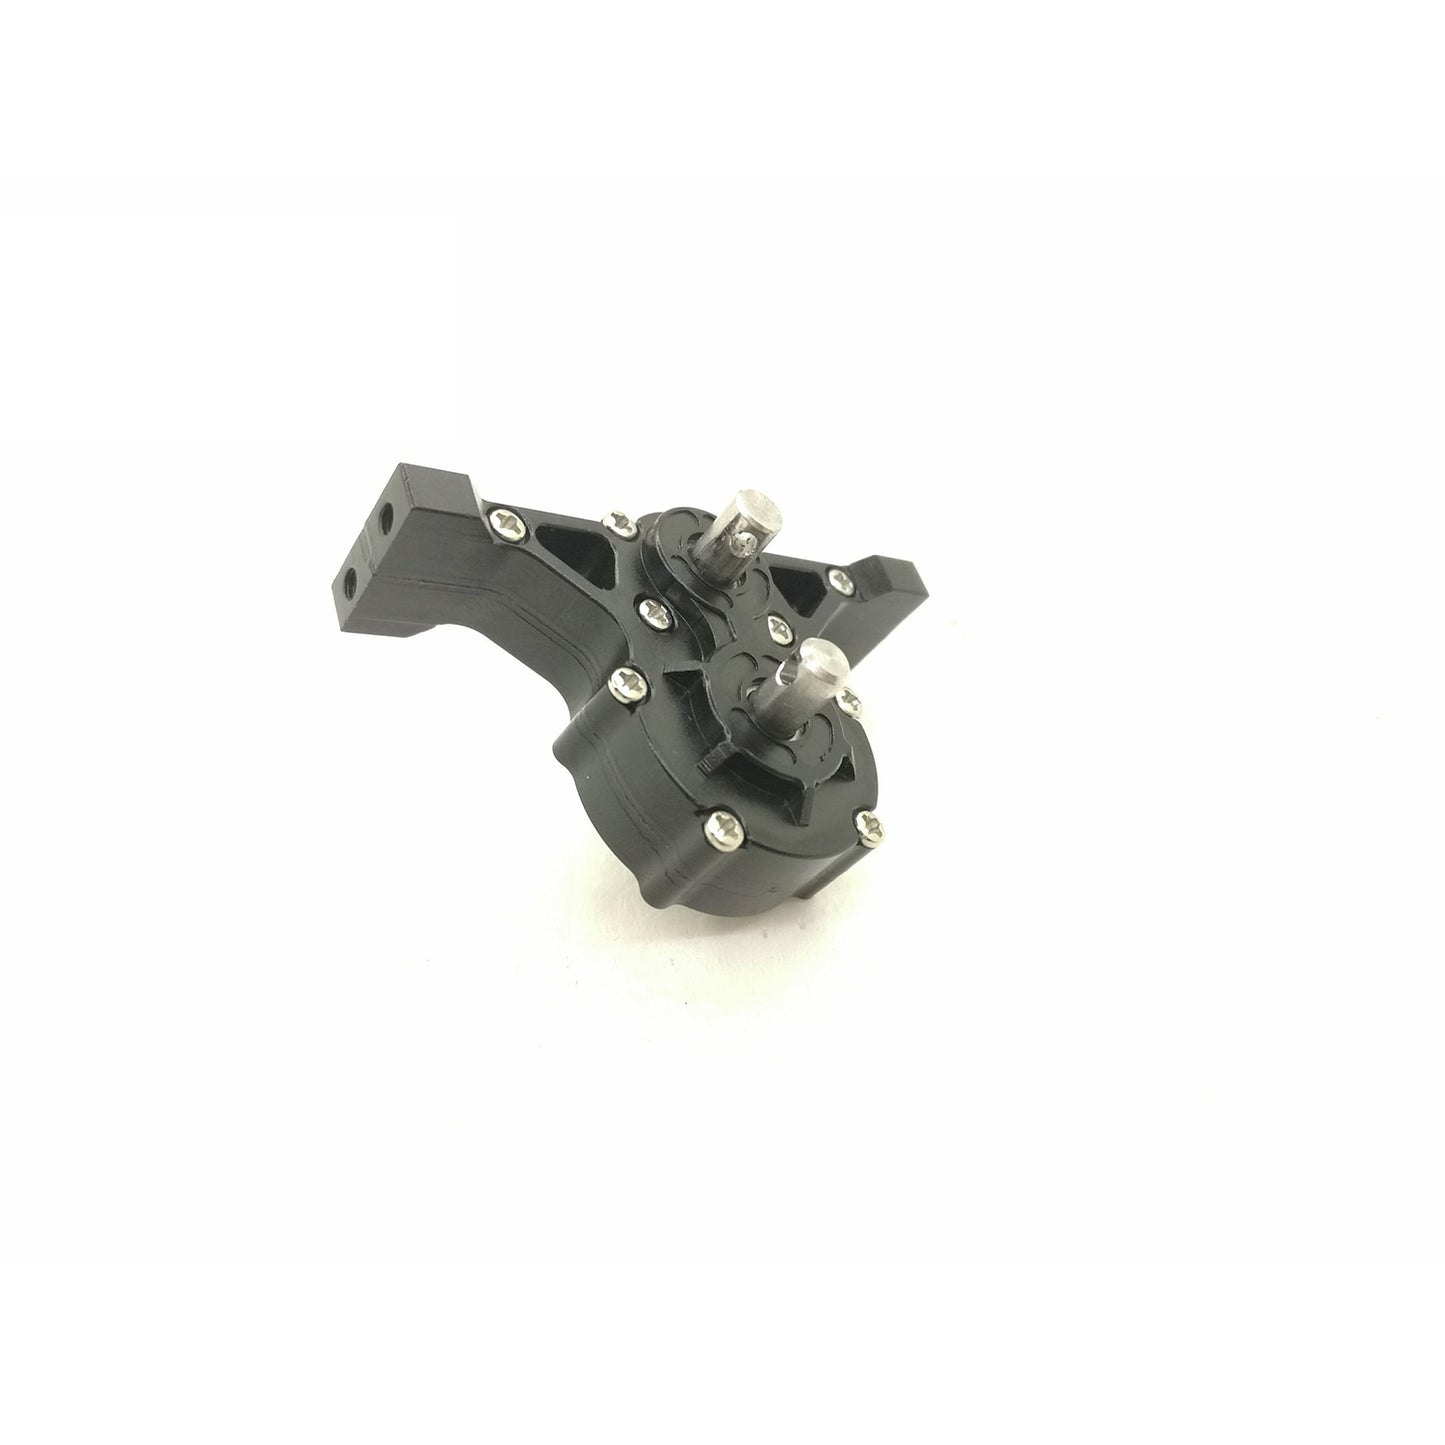 Metal Transfer Case Gearbox Upgrade Powerful Part Degree Model Upgrade for 1/14 TAMIYA R620 1851 3363 RC Tractor Truck DIY Car